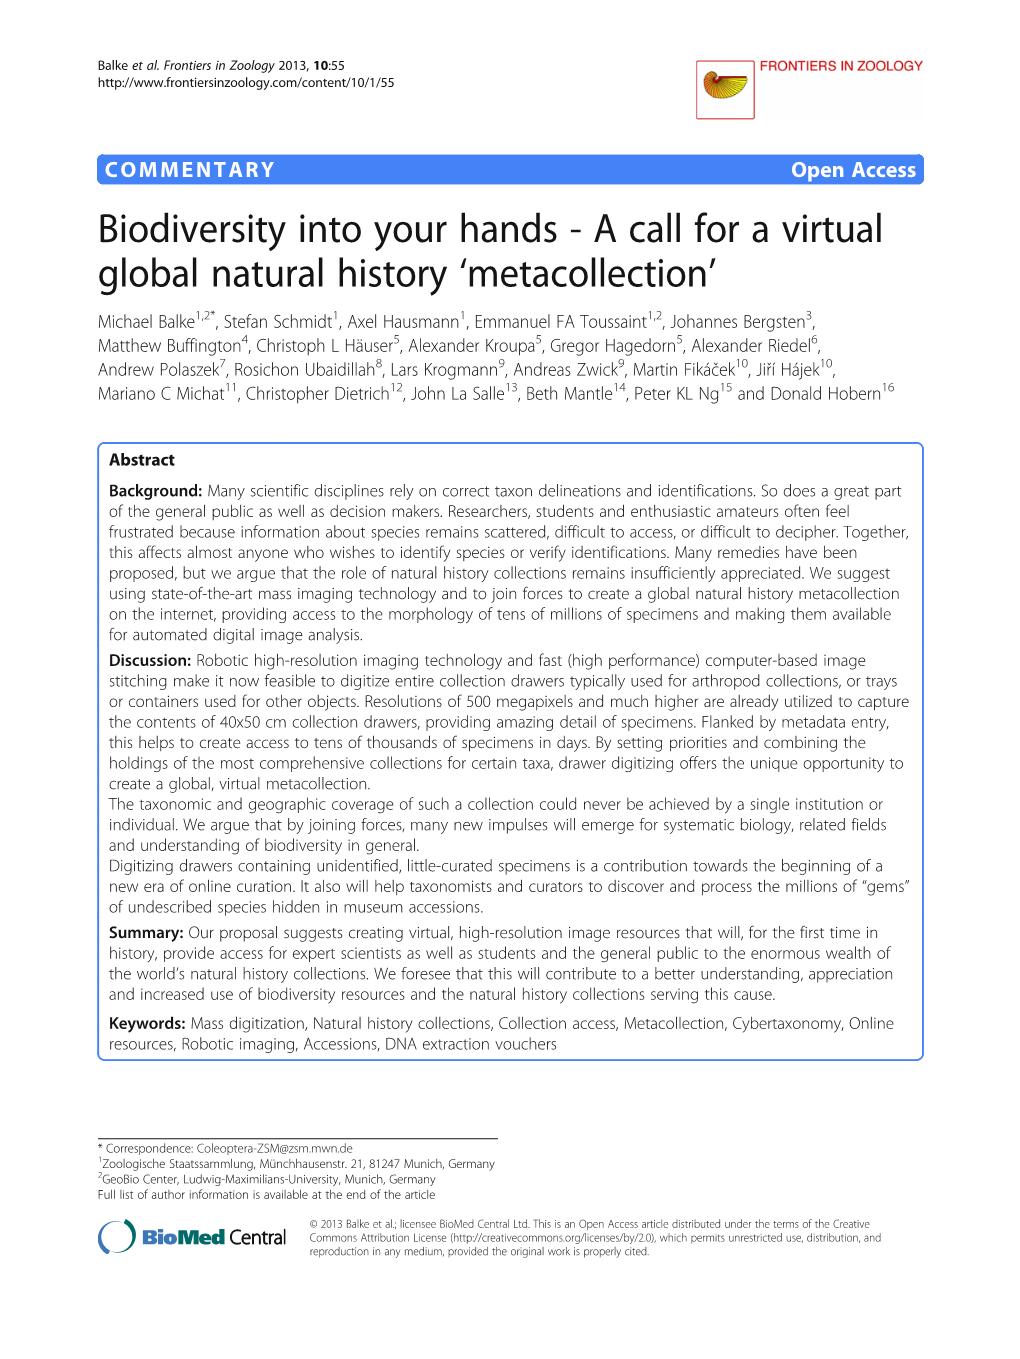 Biodiversity Into Your Hands